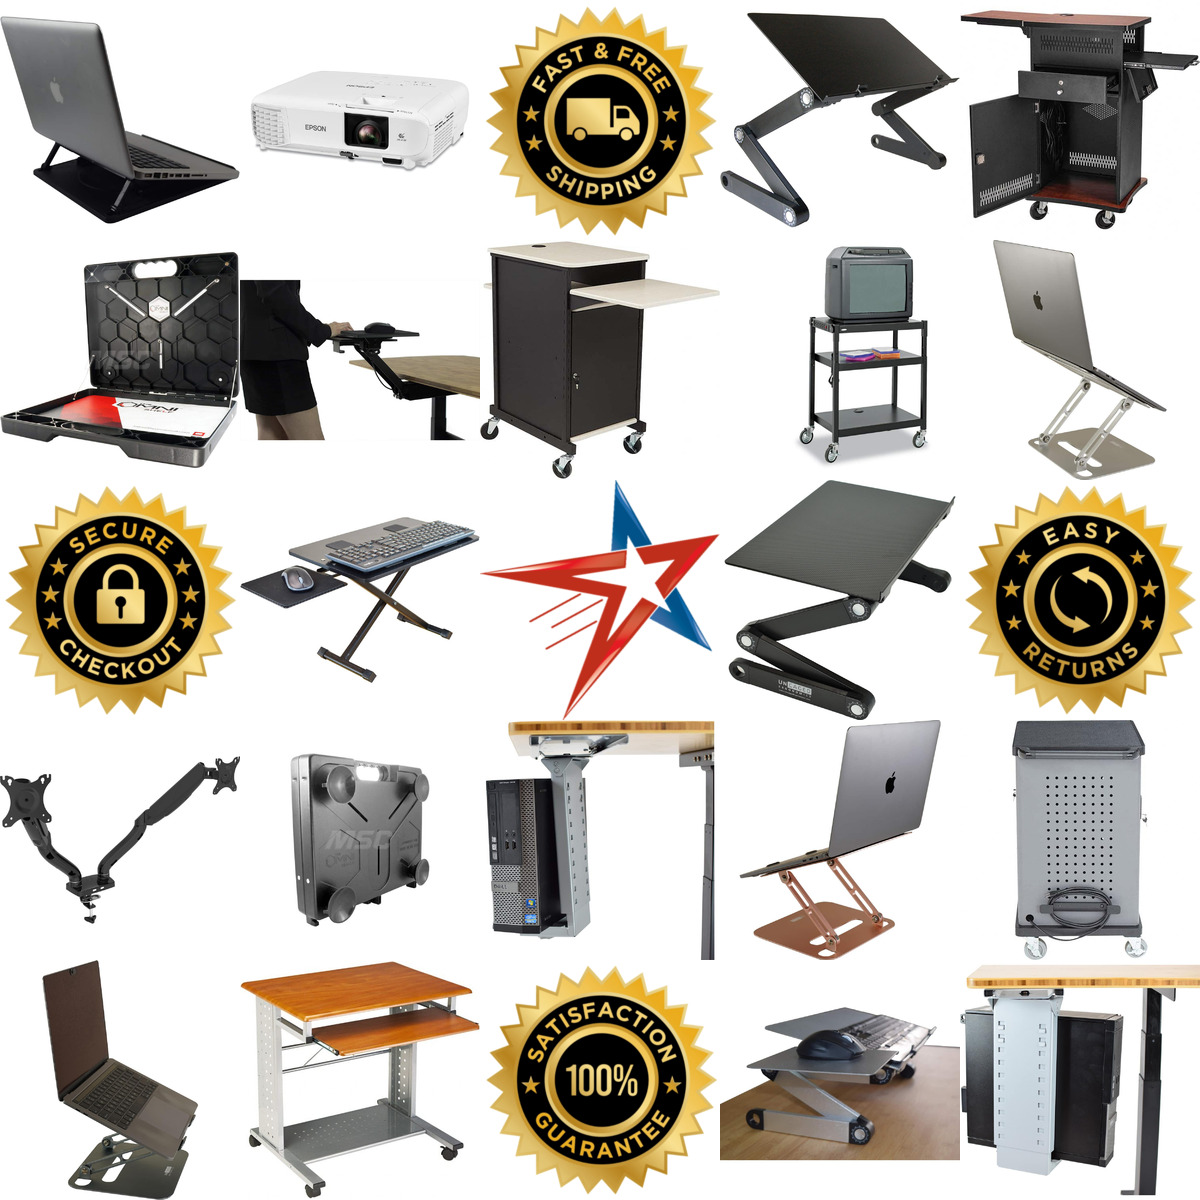 A selection of Audio Visual Equipment Carts products on GoVets